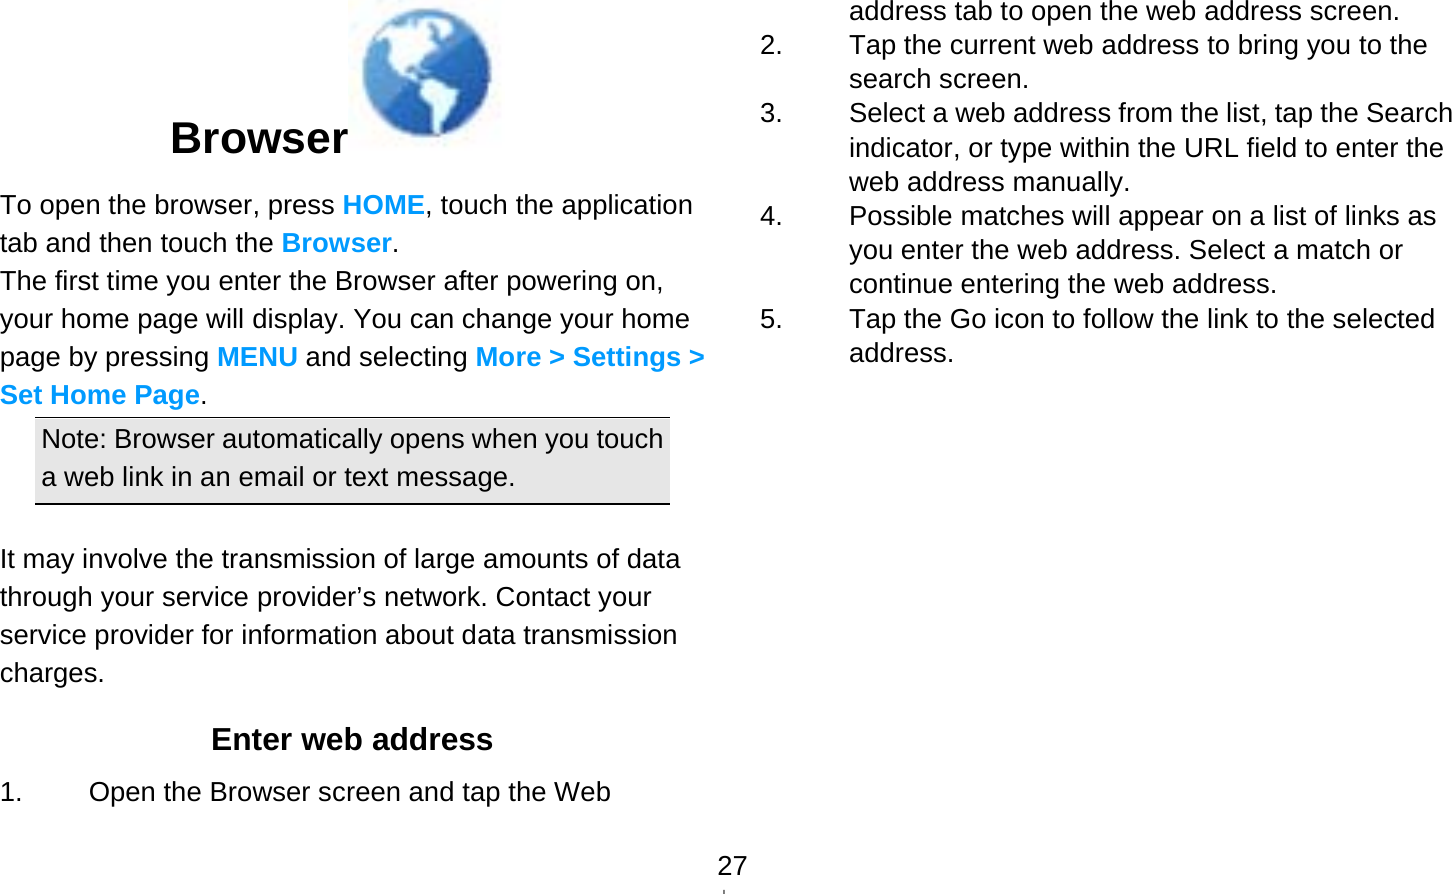   27Browser  To open the browser, press HOME, touch the application tab and then touch the Browser. The first time you enter the Browser after powering on, your home page will display. You can change your home page by pressing MENU and selecting More &gt; Settings &gt; Set Home Page.  Note: Browser automatically opens when you touch a web link in an email or text message.  It may involve the transmission of large amounts of data through your service provider’s network. Contact your service provider for information about data transmission charges. Enter web address 1.  Open the Browser screen and tap the Web address tab to open the web address screen. 2.  Tap the current web address to bring you to the search screen. 3.  Select a web address from the list, tap the Search indicator, or type within the URL field to enter the web address manually. 4.  Possible matches will appear on a list of links as you enter the web address. Select a match or continue entering the web address. 5.  Tap the Go icon to follow the link to the selected address. 